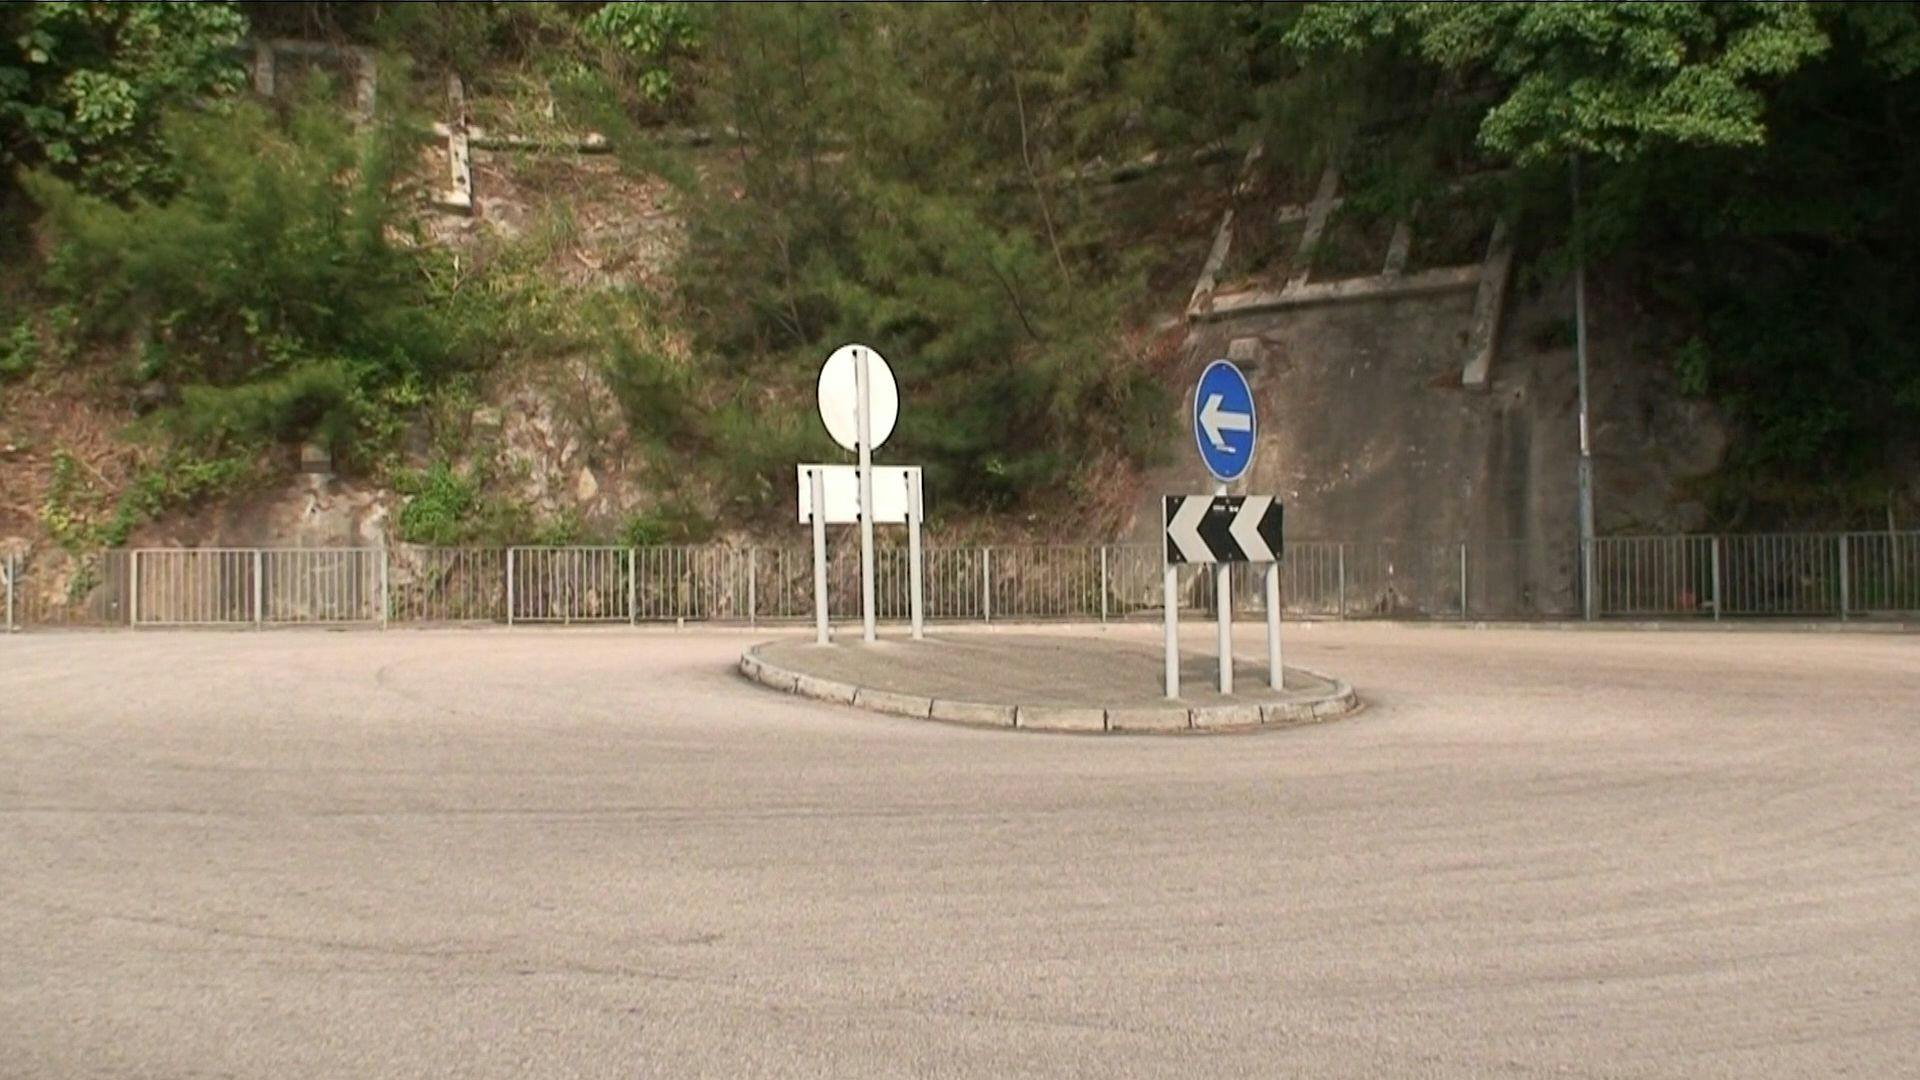 an image of a roundabout in a road.